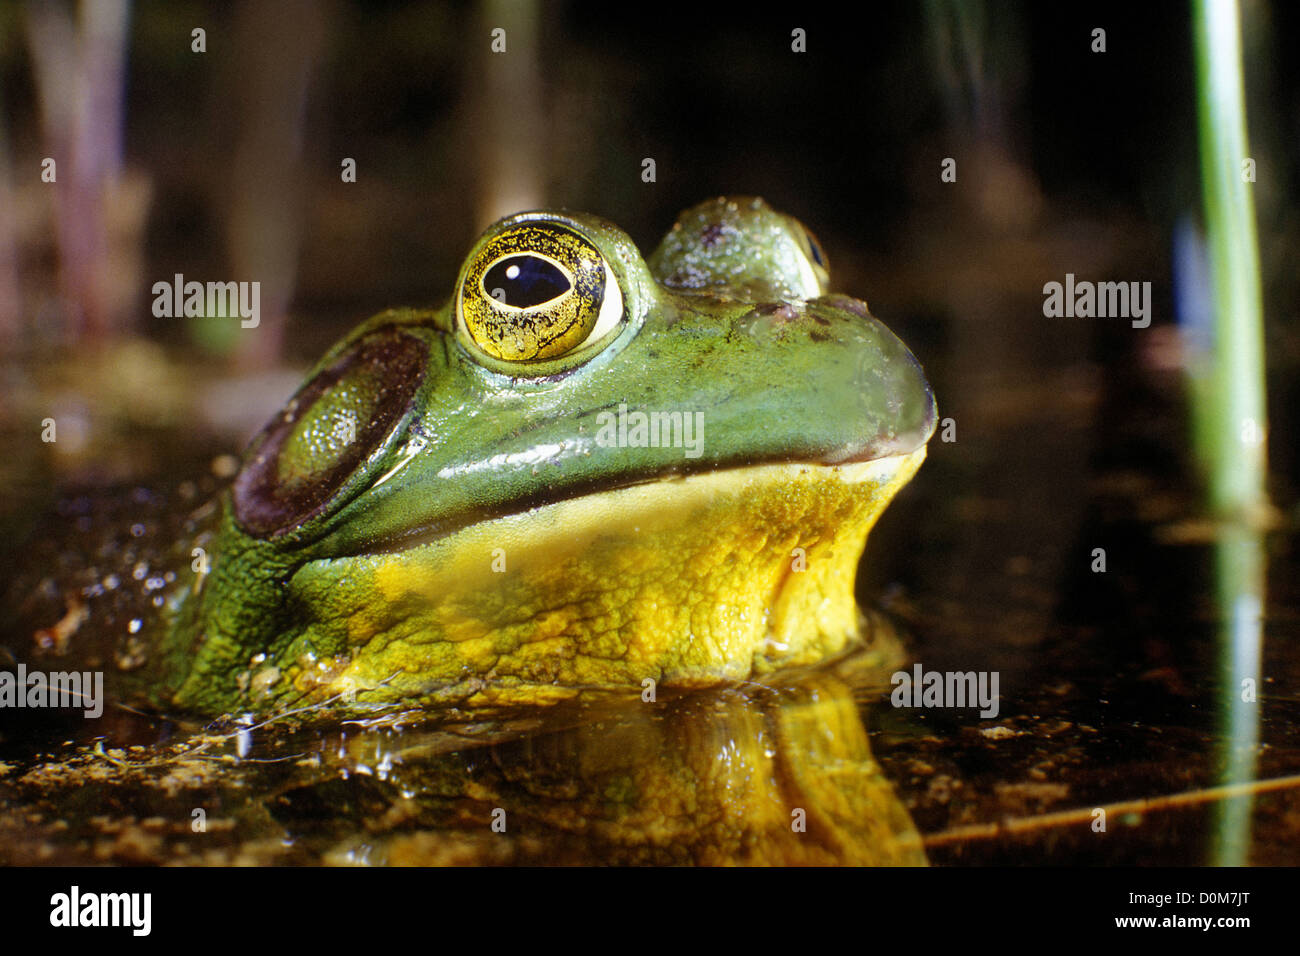 With eyes bulging, a bullfrog emerges from the depths of its kettle pond habitat in Cape Cod, Massachusetts. Stock Photo